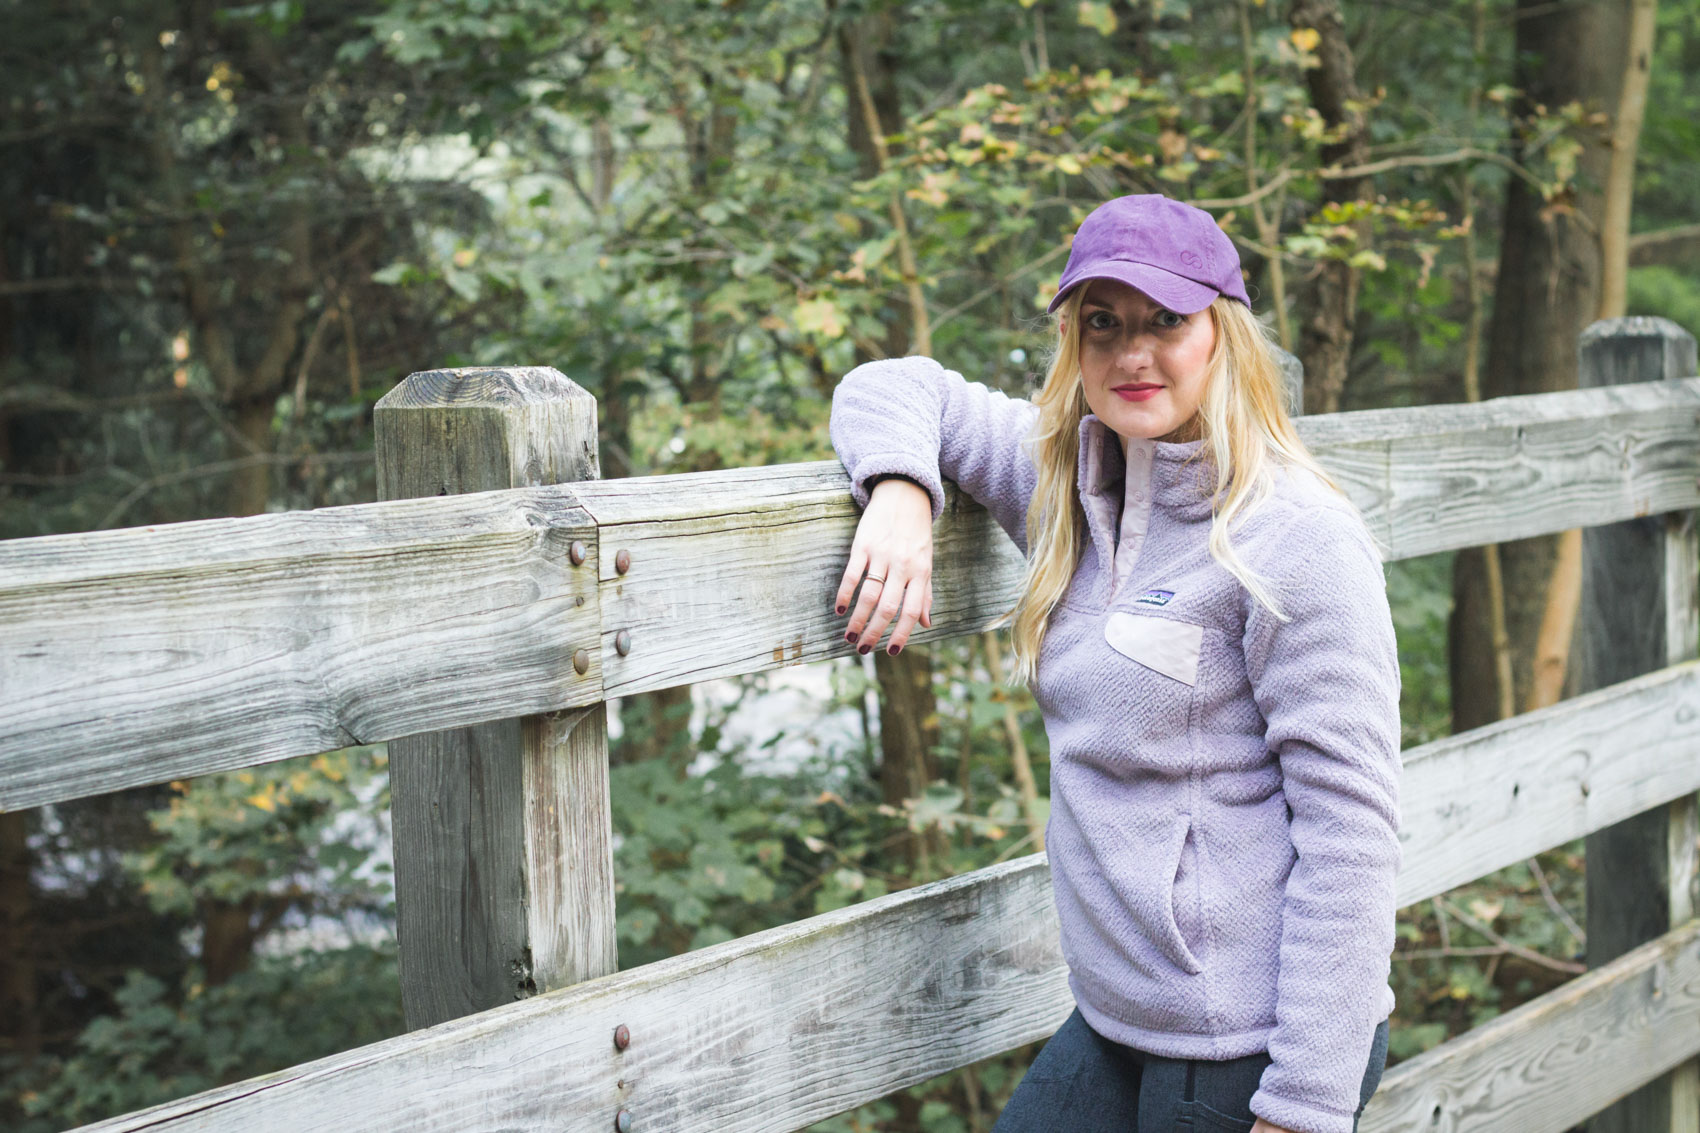 It's rare to find a Patagonia pullover sale going on, but it's your lucky day! I add this fuzzy purple Patagonia snap t pullover to my winter outfits all the time!